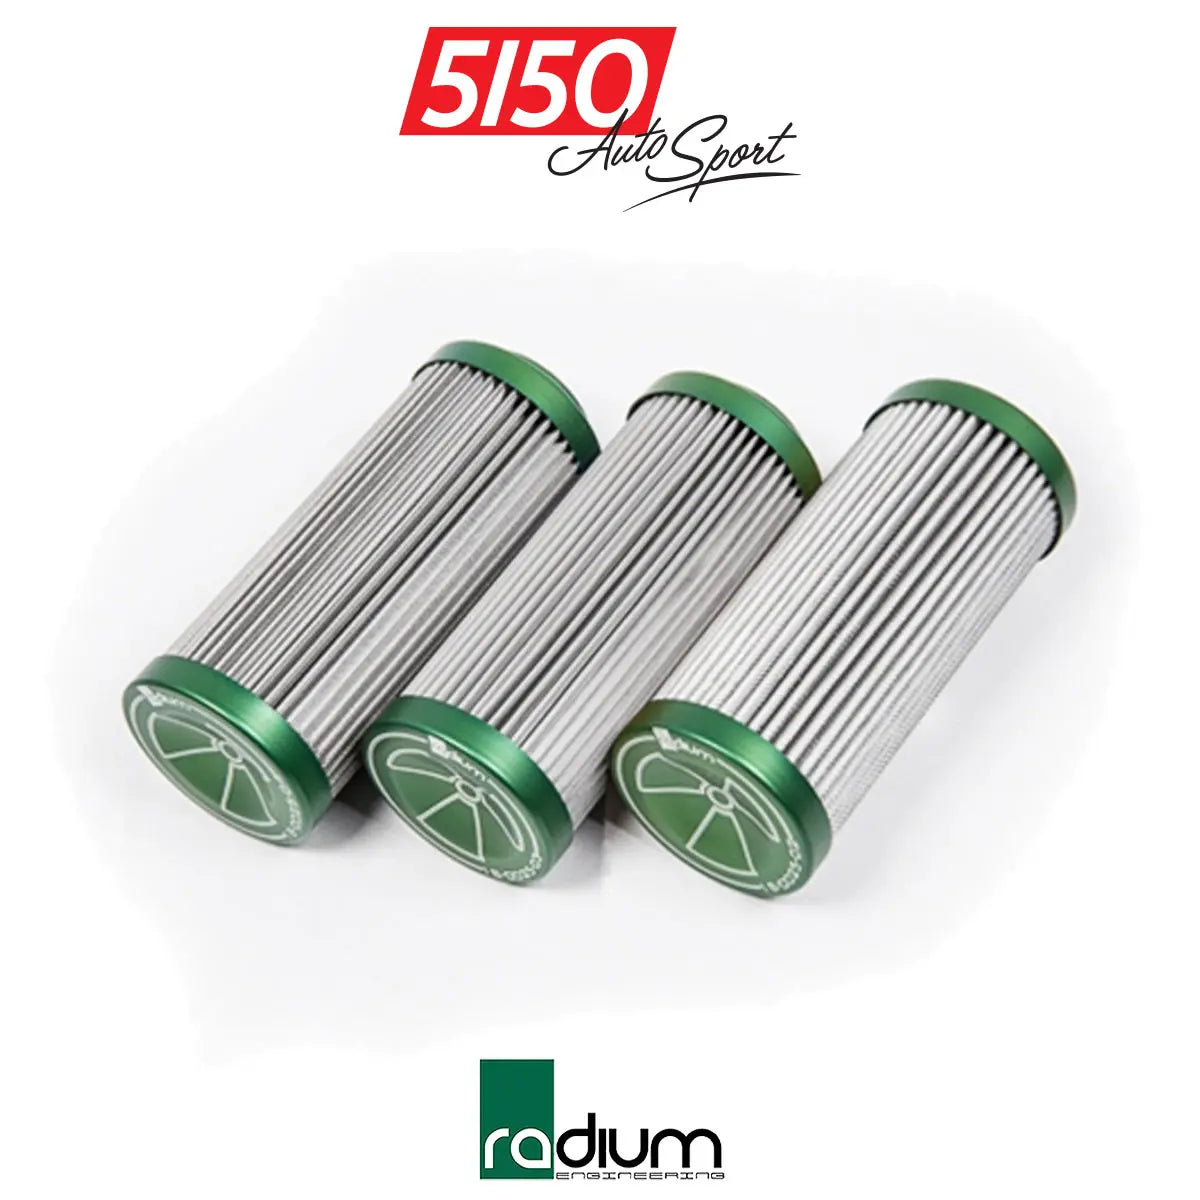 Replacement Fuel Filter Elements for Radium Engineering Inline Fuel Filters